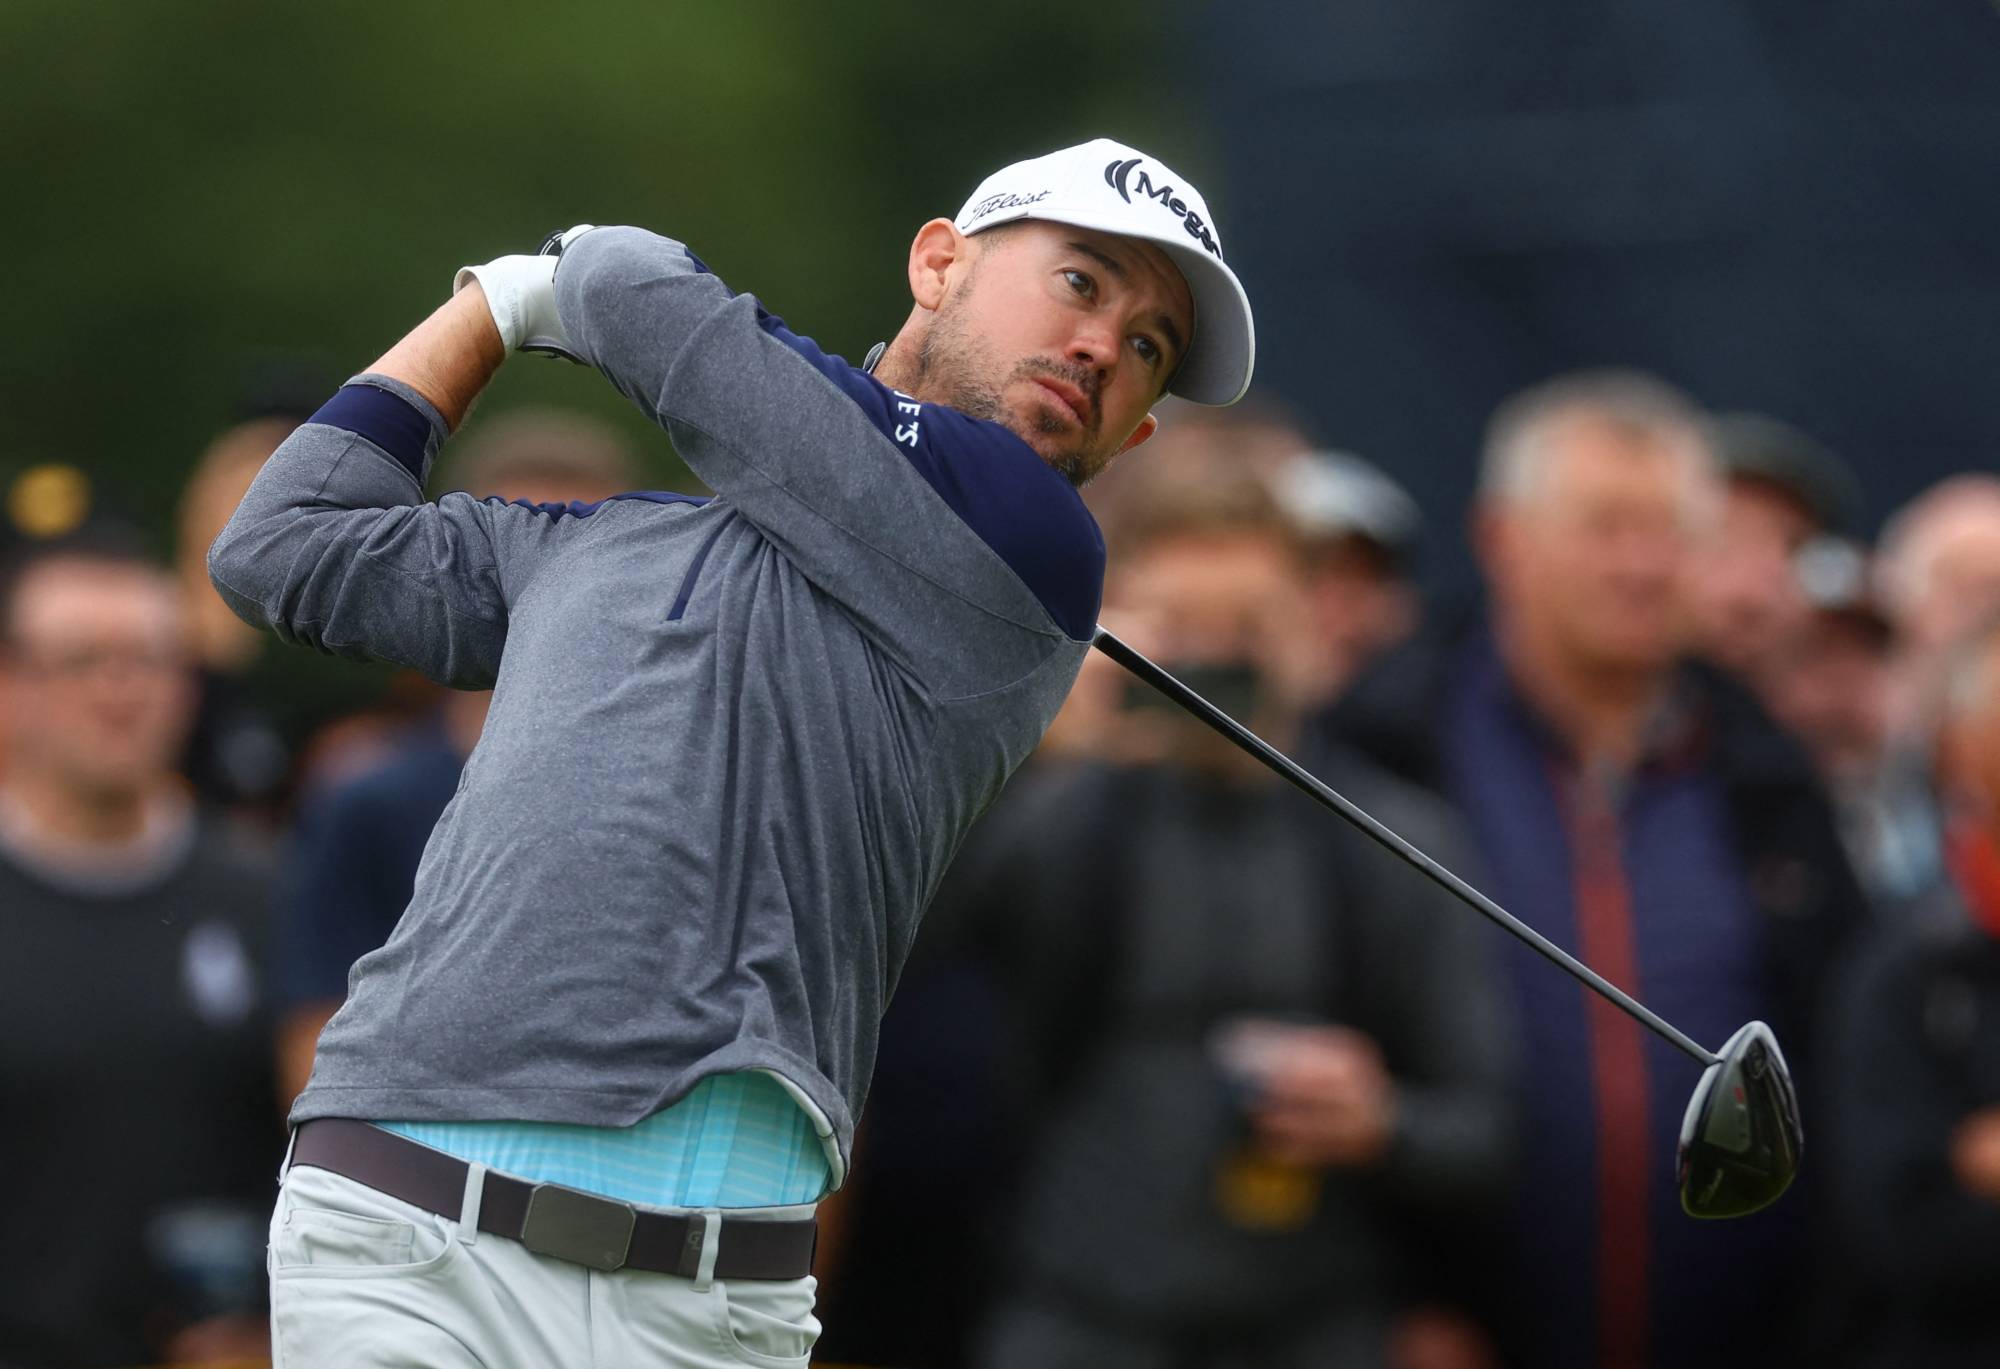 Brian Harman tees off on the 16th hole during the third round of the British Open in Hoylake, England, on Saturday. | REUTERS